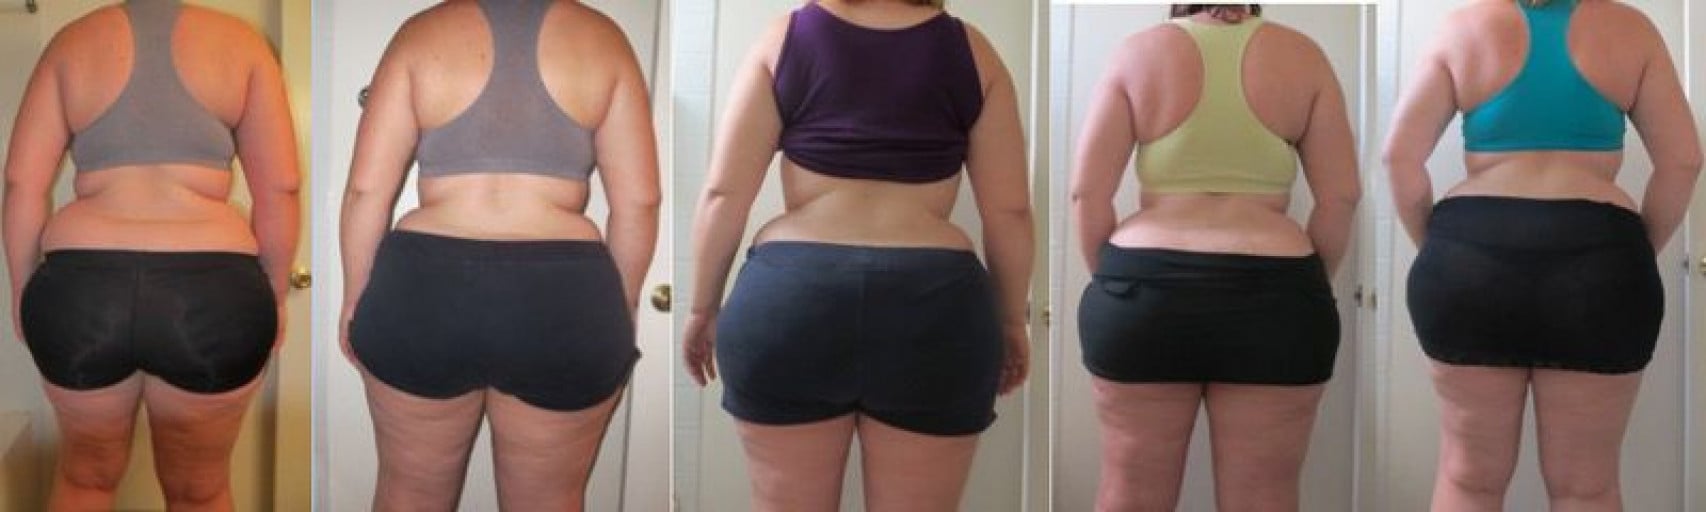 A picture of a 5'11" female showing a weight reduction from 282 pounds to 263 pounds. A net loss of 19 pounds.